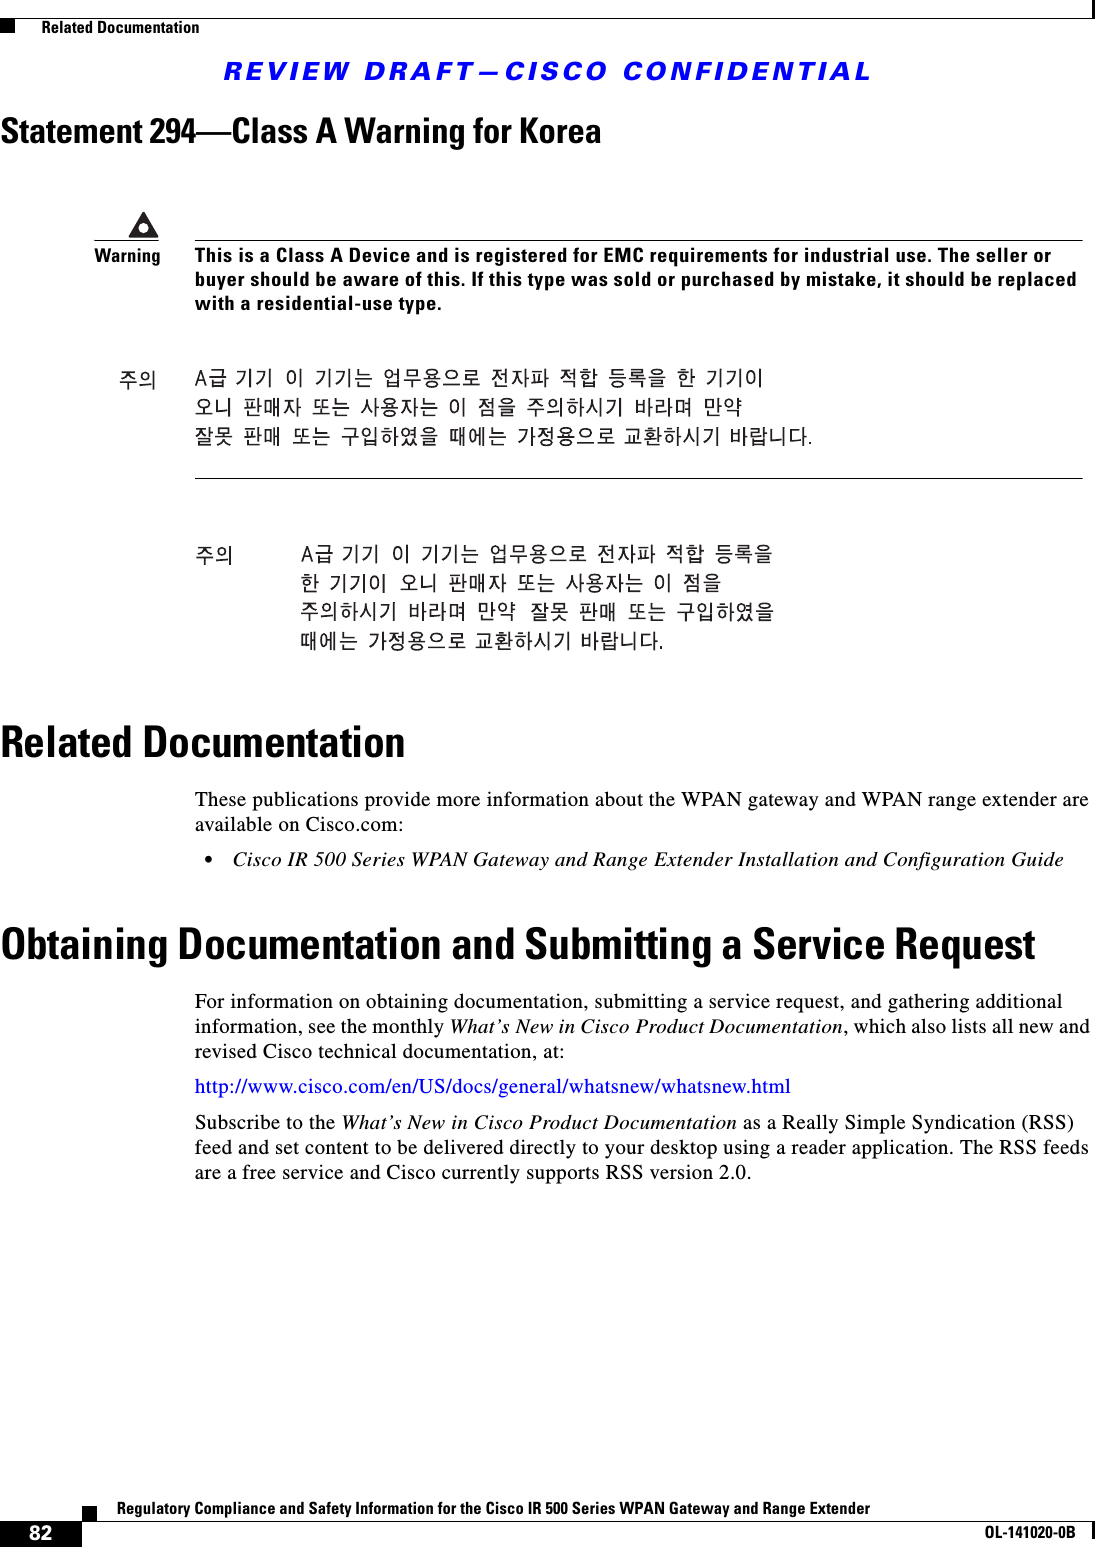 REVIEW DRAFT—CISCO CONFIDENTIAL82Regulatory Compliance and Safety Information for the Cisco IR 500 Series WPAN Gateway and Range ExtenderOL-141020-0B  Related DocumentationStatement 294—Class A Warning for KoreaRelated DocumentationThese publications provide more information about the WPAN gateway and WPAN range extender are available on Cisco.com:•Cisco IR 500 Series WPAN Gateway and Range Extender Installation and Configuration GuideObtaining Documentation and Submitting a Service RequestFor information on obtaining documentation, submitting a service request, and gathering additional information, see the monthly What’s New in Cisco Product Documentation, which also lists all new and revised Cisco technical documentation, at:http://www.cisco.com/en/US/docs/general/whatsnew/whatsnew.htmlSubscribe to the What’s New in Cisco Product Documentation as a Really Simple Syndication (RSS) feed and set content to be delivered directly to your desktop using a reader application. The RSS feeds are a free service and Cisco currently supports RSS version 2.0. WarningThis is a Class A Device and is registered for EMC requirements for industrial use. The seller or buyer should be aware of this. If this type was sold or purchased by mistake, it should be replaced with a residential-use type.